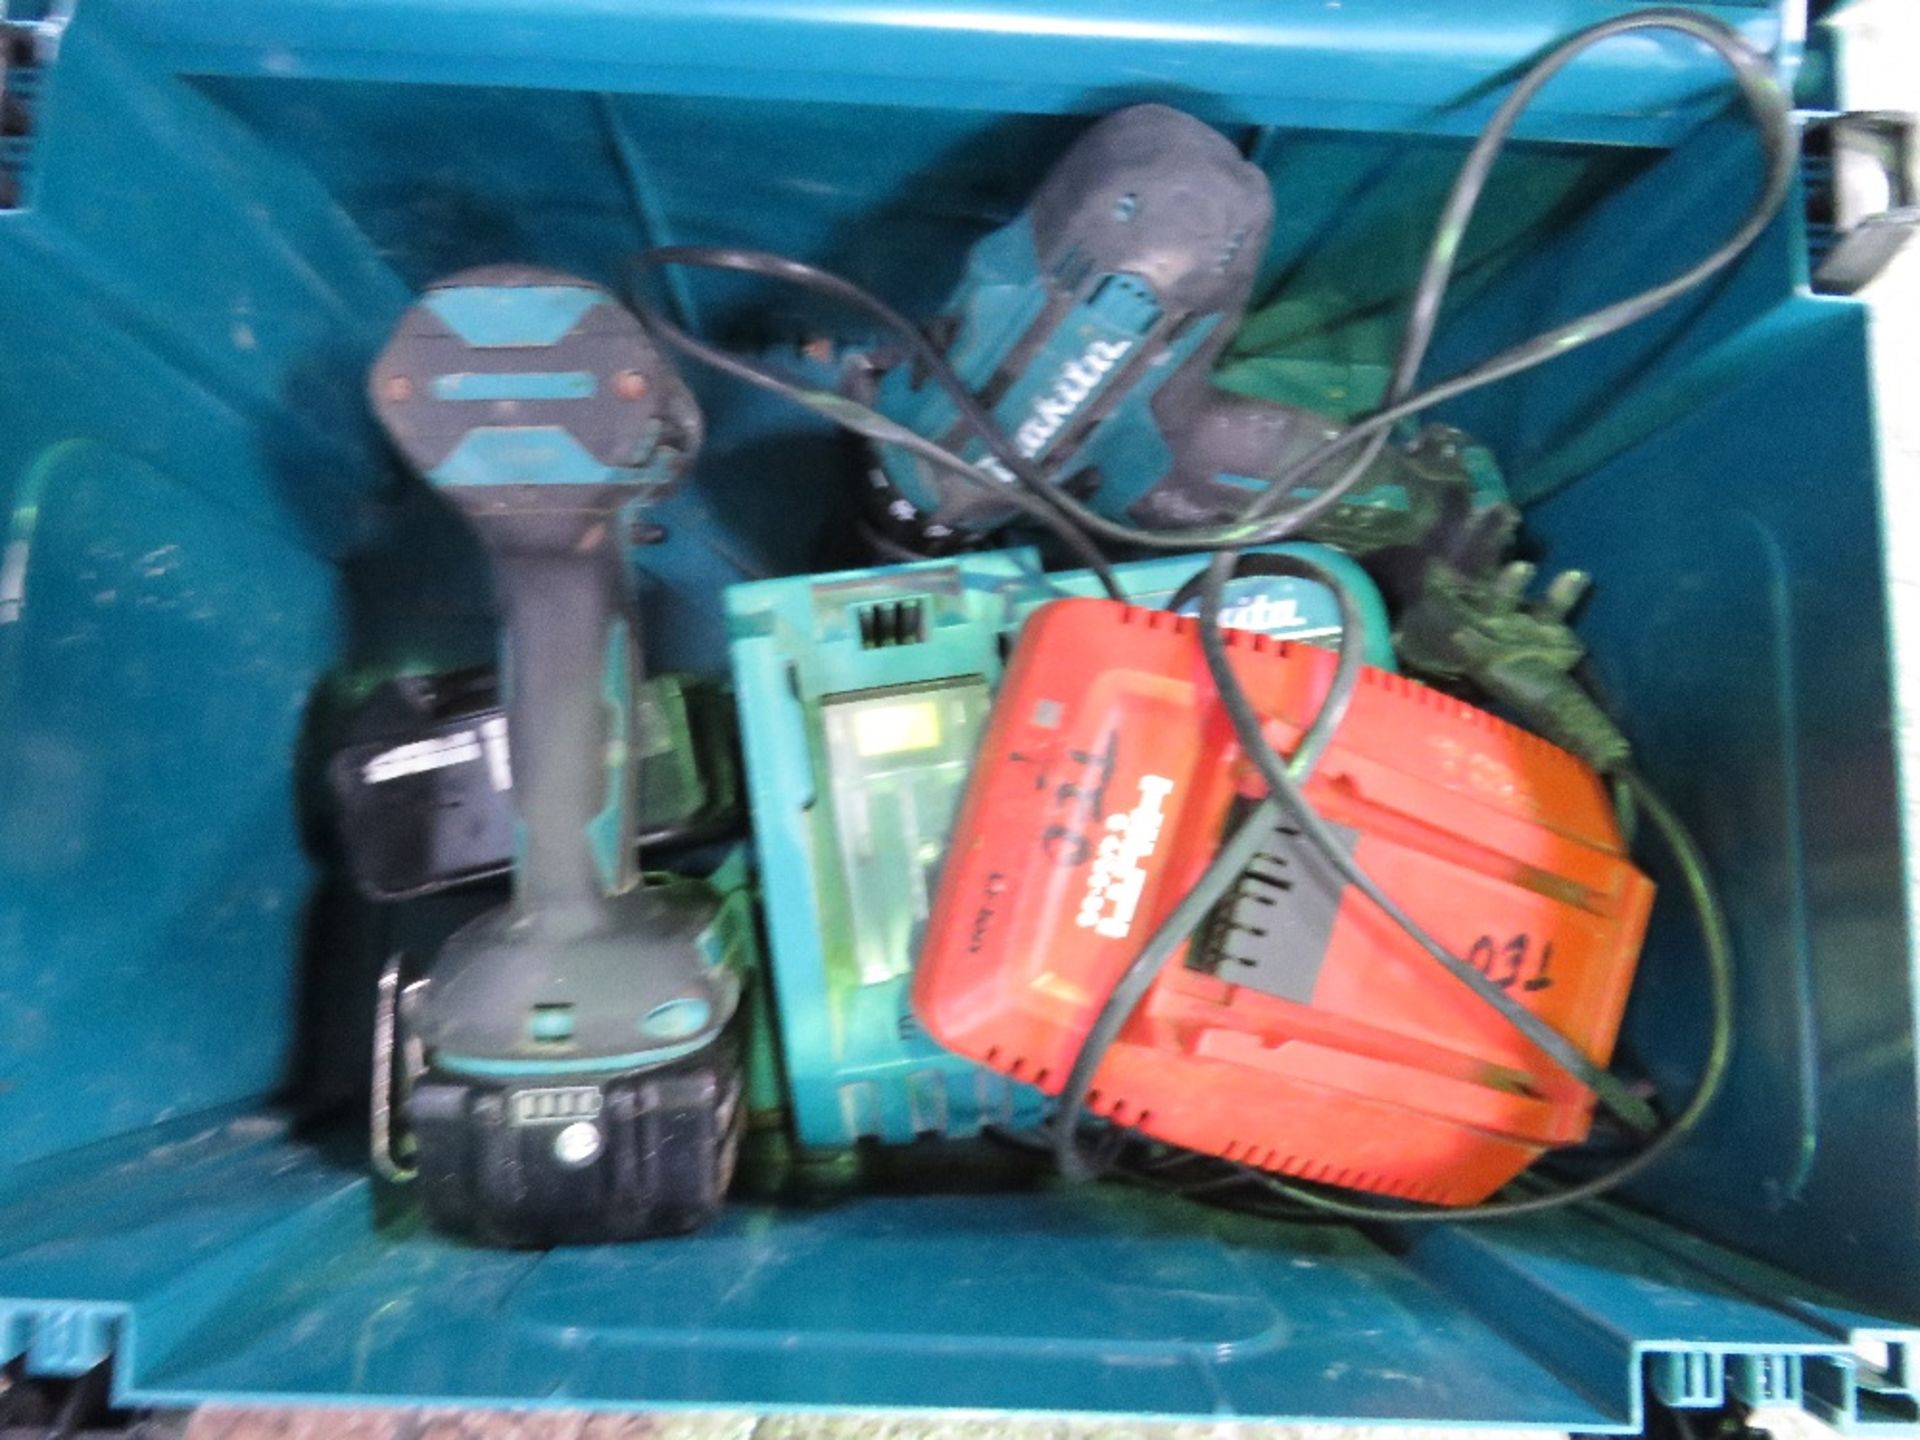 BATTERY TOOLS IN A MAKITA BOX. DIRECT FROM LOCAL COMPANY WHO ARE CLOSING THE LANDSCAPE MAINTENANCE P